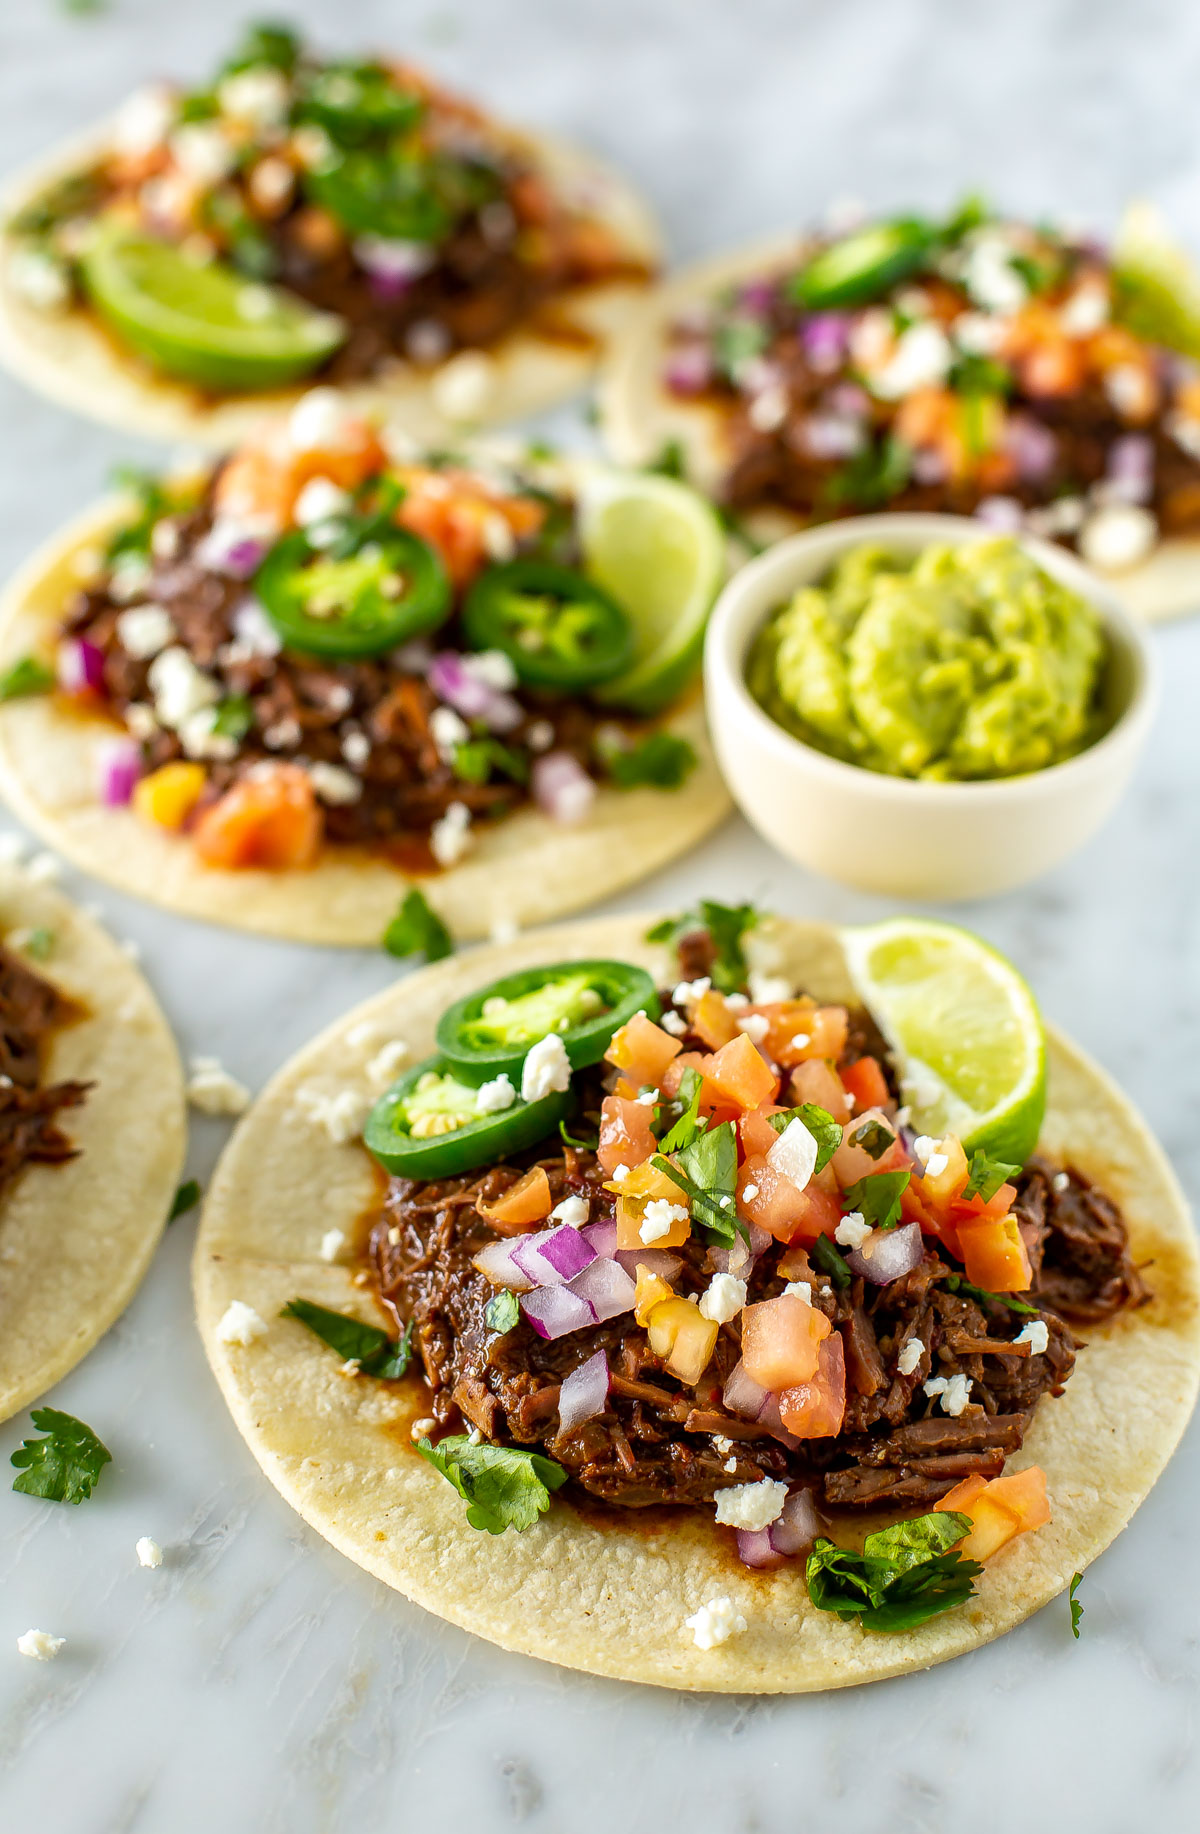 Four shredded beef tacos with a cup of guacamole on the side.